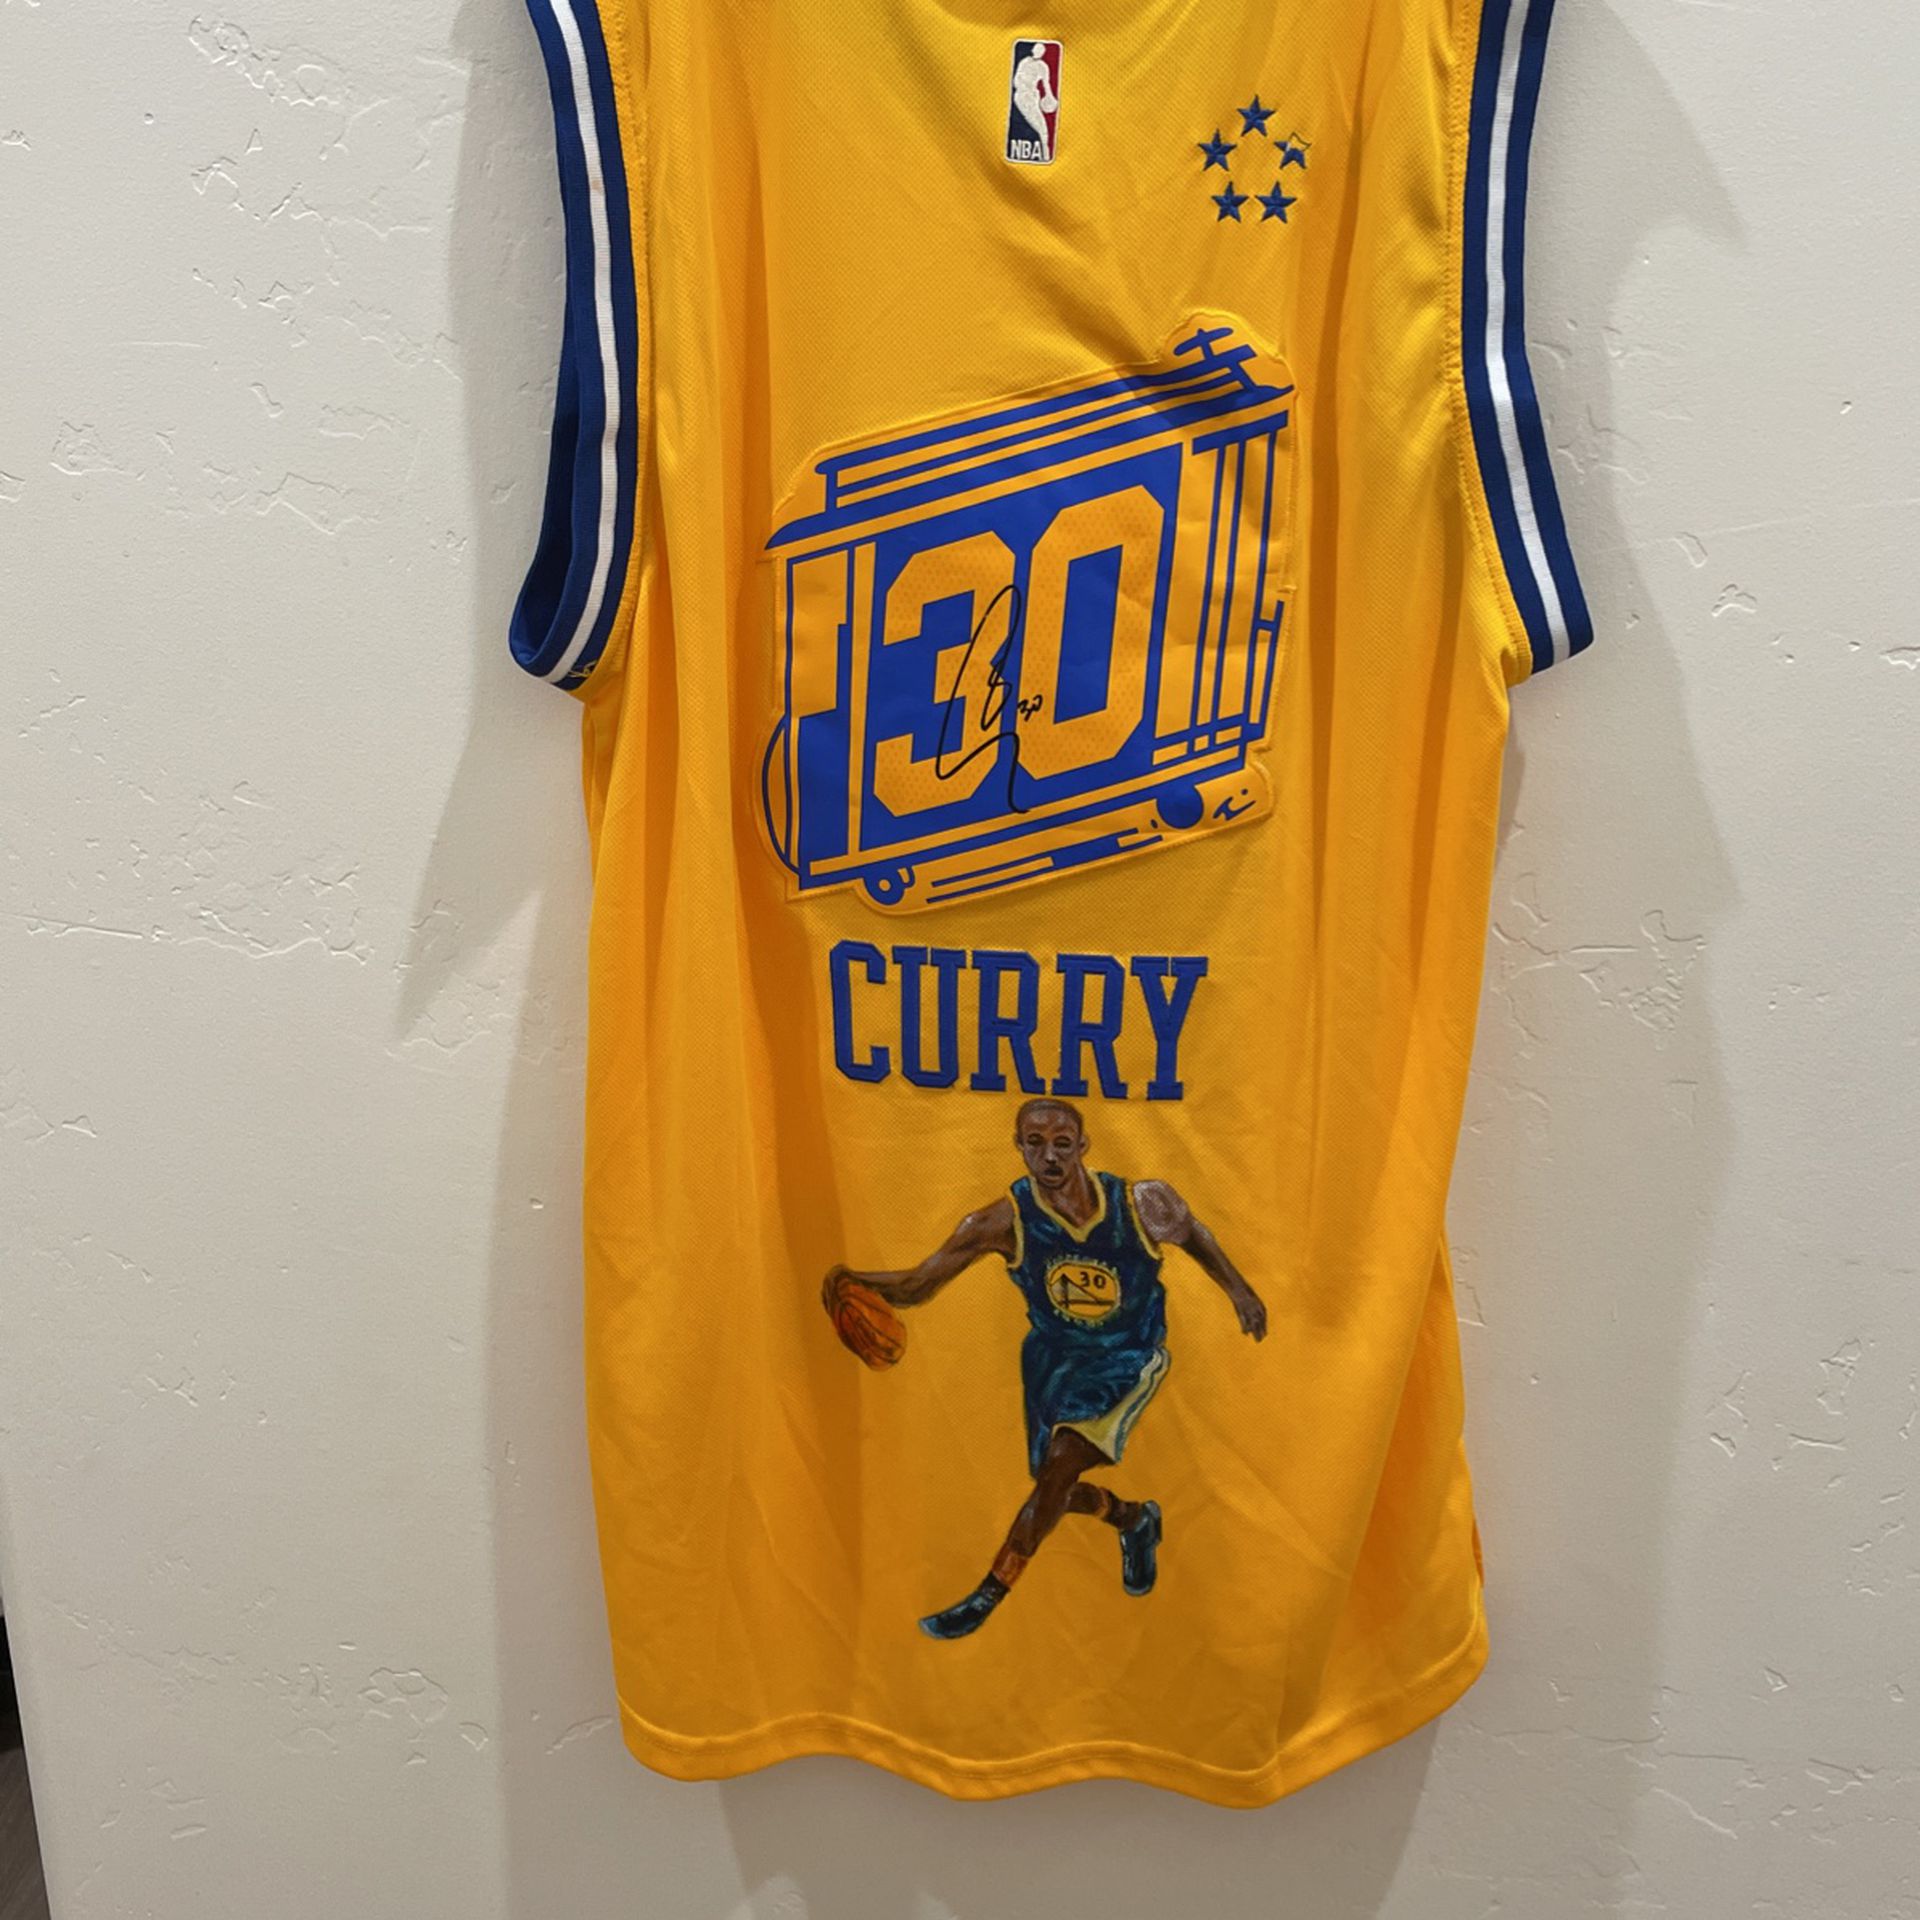 Steph Curry Autographed Jersey With Cool Hand Painted Picture Of